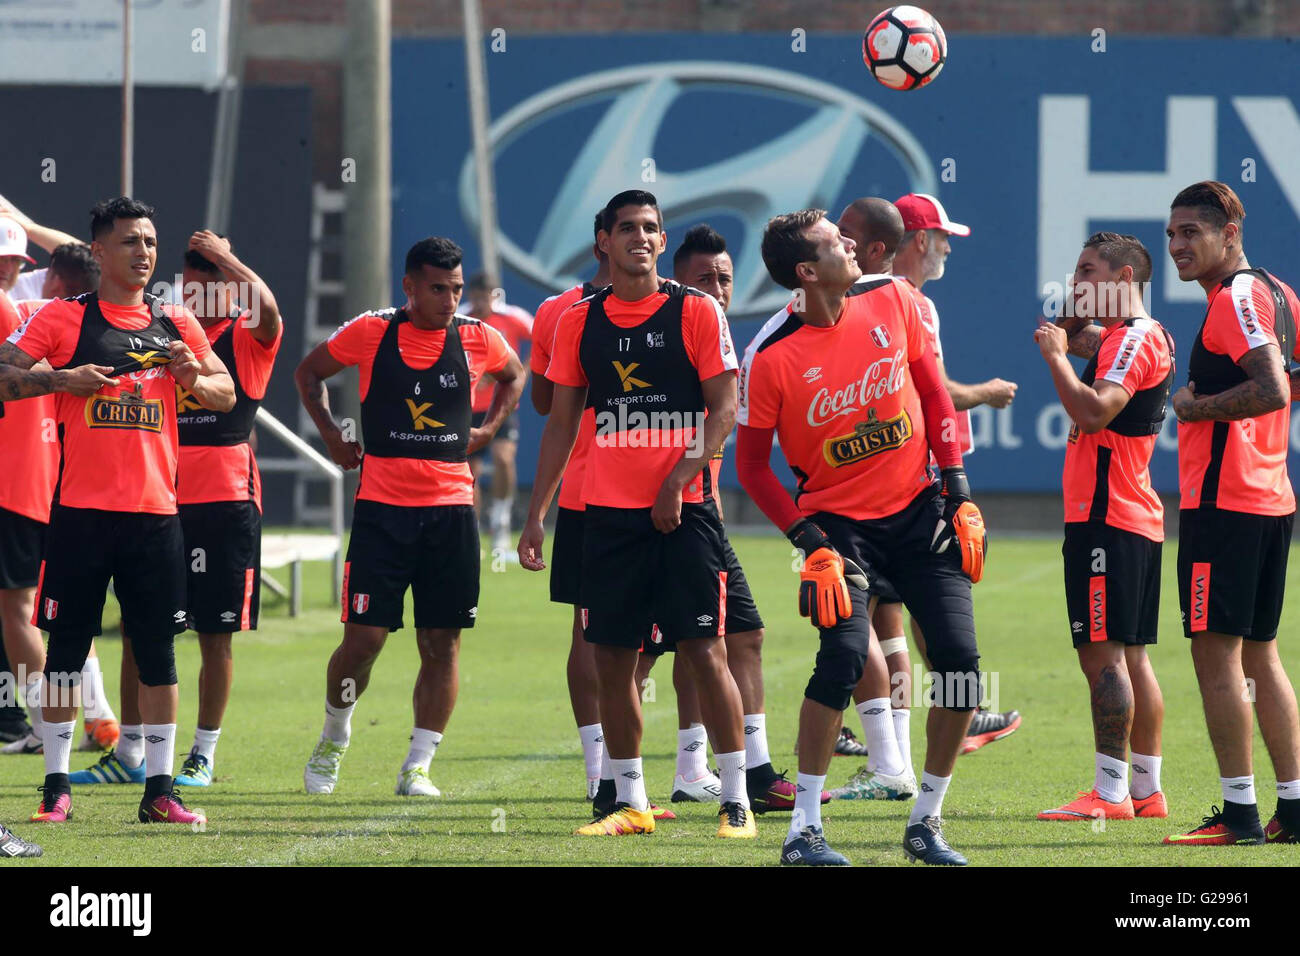 Lima, Peru. 25th May, 2016. Peru's National Soccer Team players take part in a training session at the National Sport Village, in Lima, capital of Peru, on May 25, 2016. The Peru's National Soccer Team had its last training before traveling to the United States to participate in the Centennial American Cup international tournament. © Oscar Farje Gomero/ANDINA/Xinhua/Alamy Live News Stock Photo